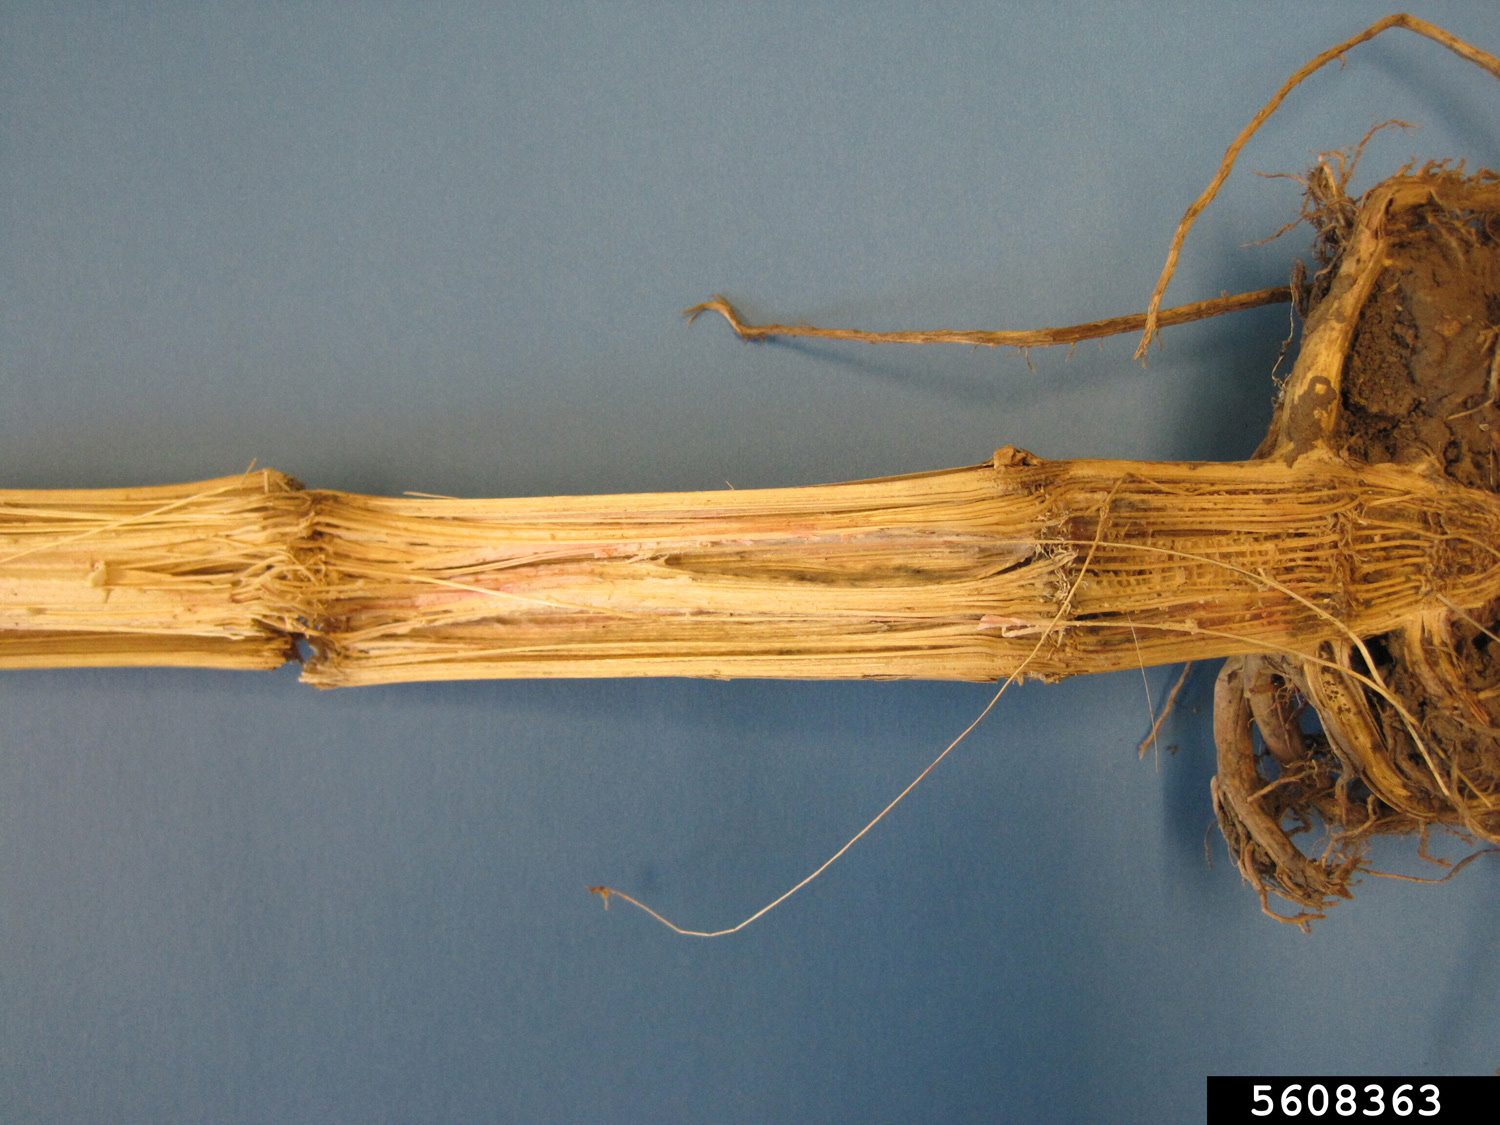 a stalk of corn has been cut in half to show the innner structure, which looks like it's starting to rot